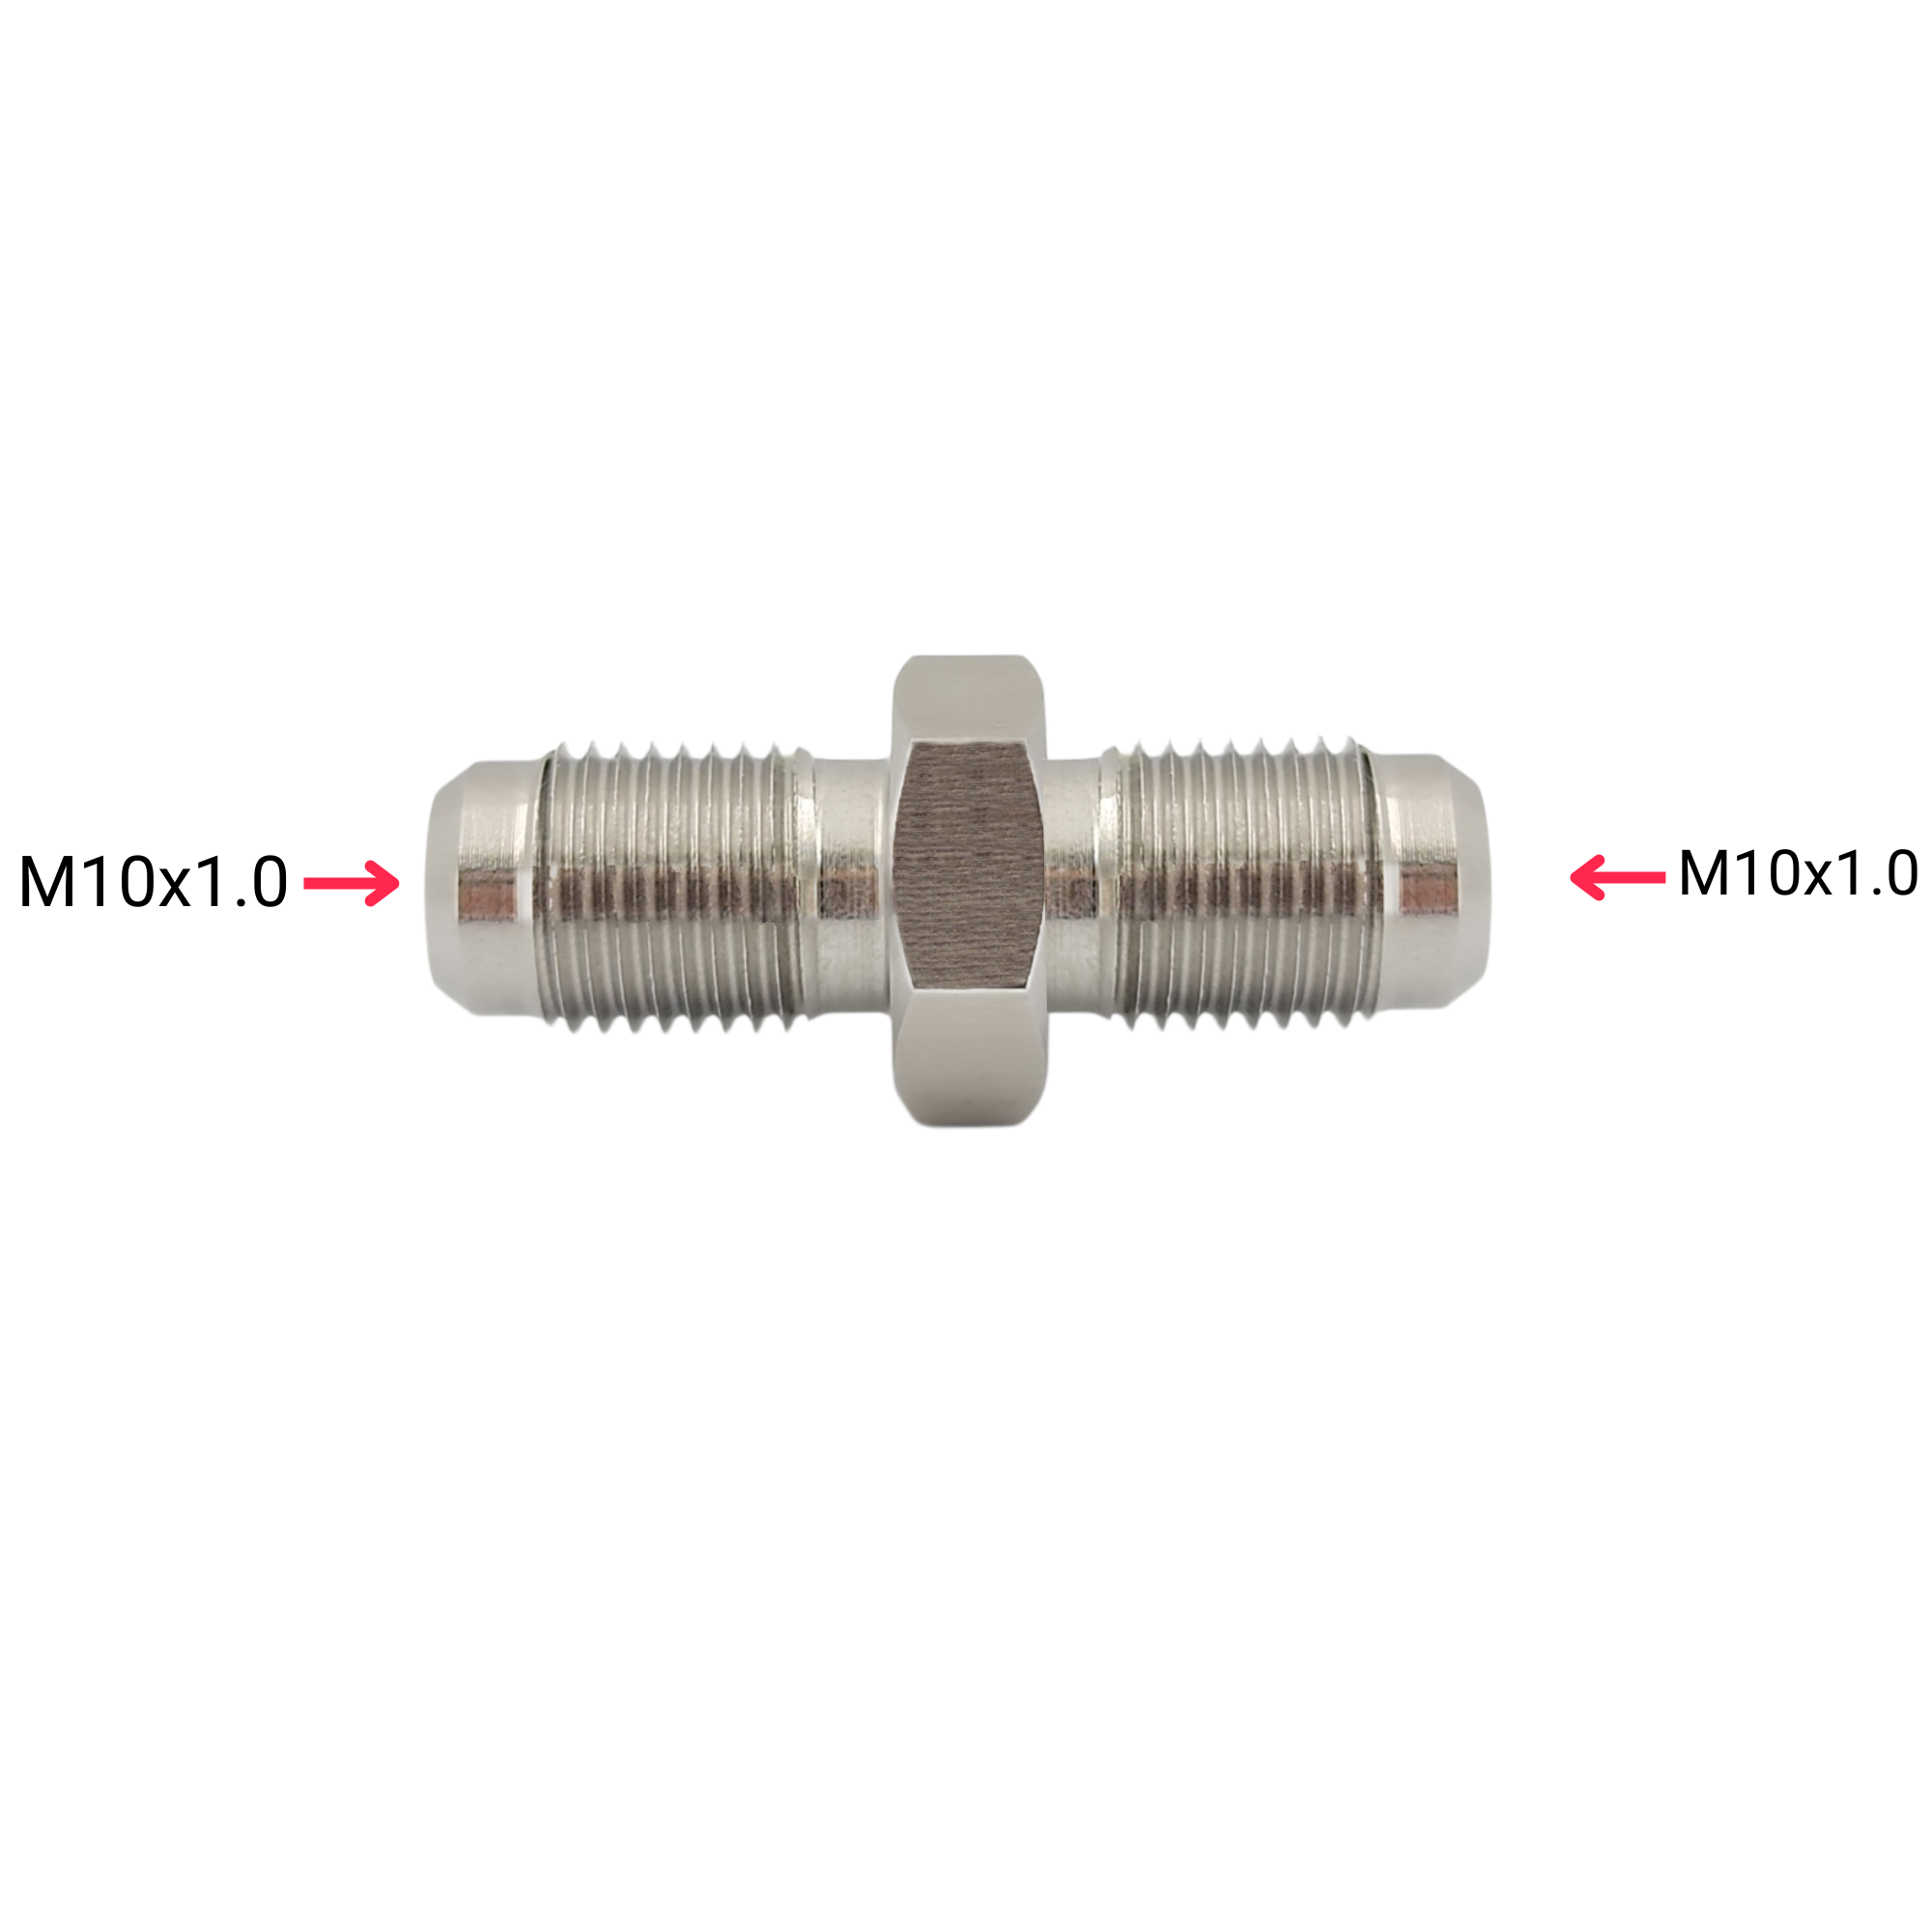 M10x1.0 to M10x1.0 Fitting - Male Union Coupler Adapter for Brake Clutch Fuel Oil and Coolant (M10-10mm)